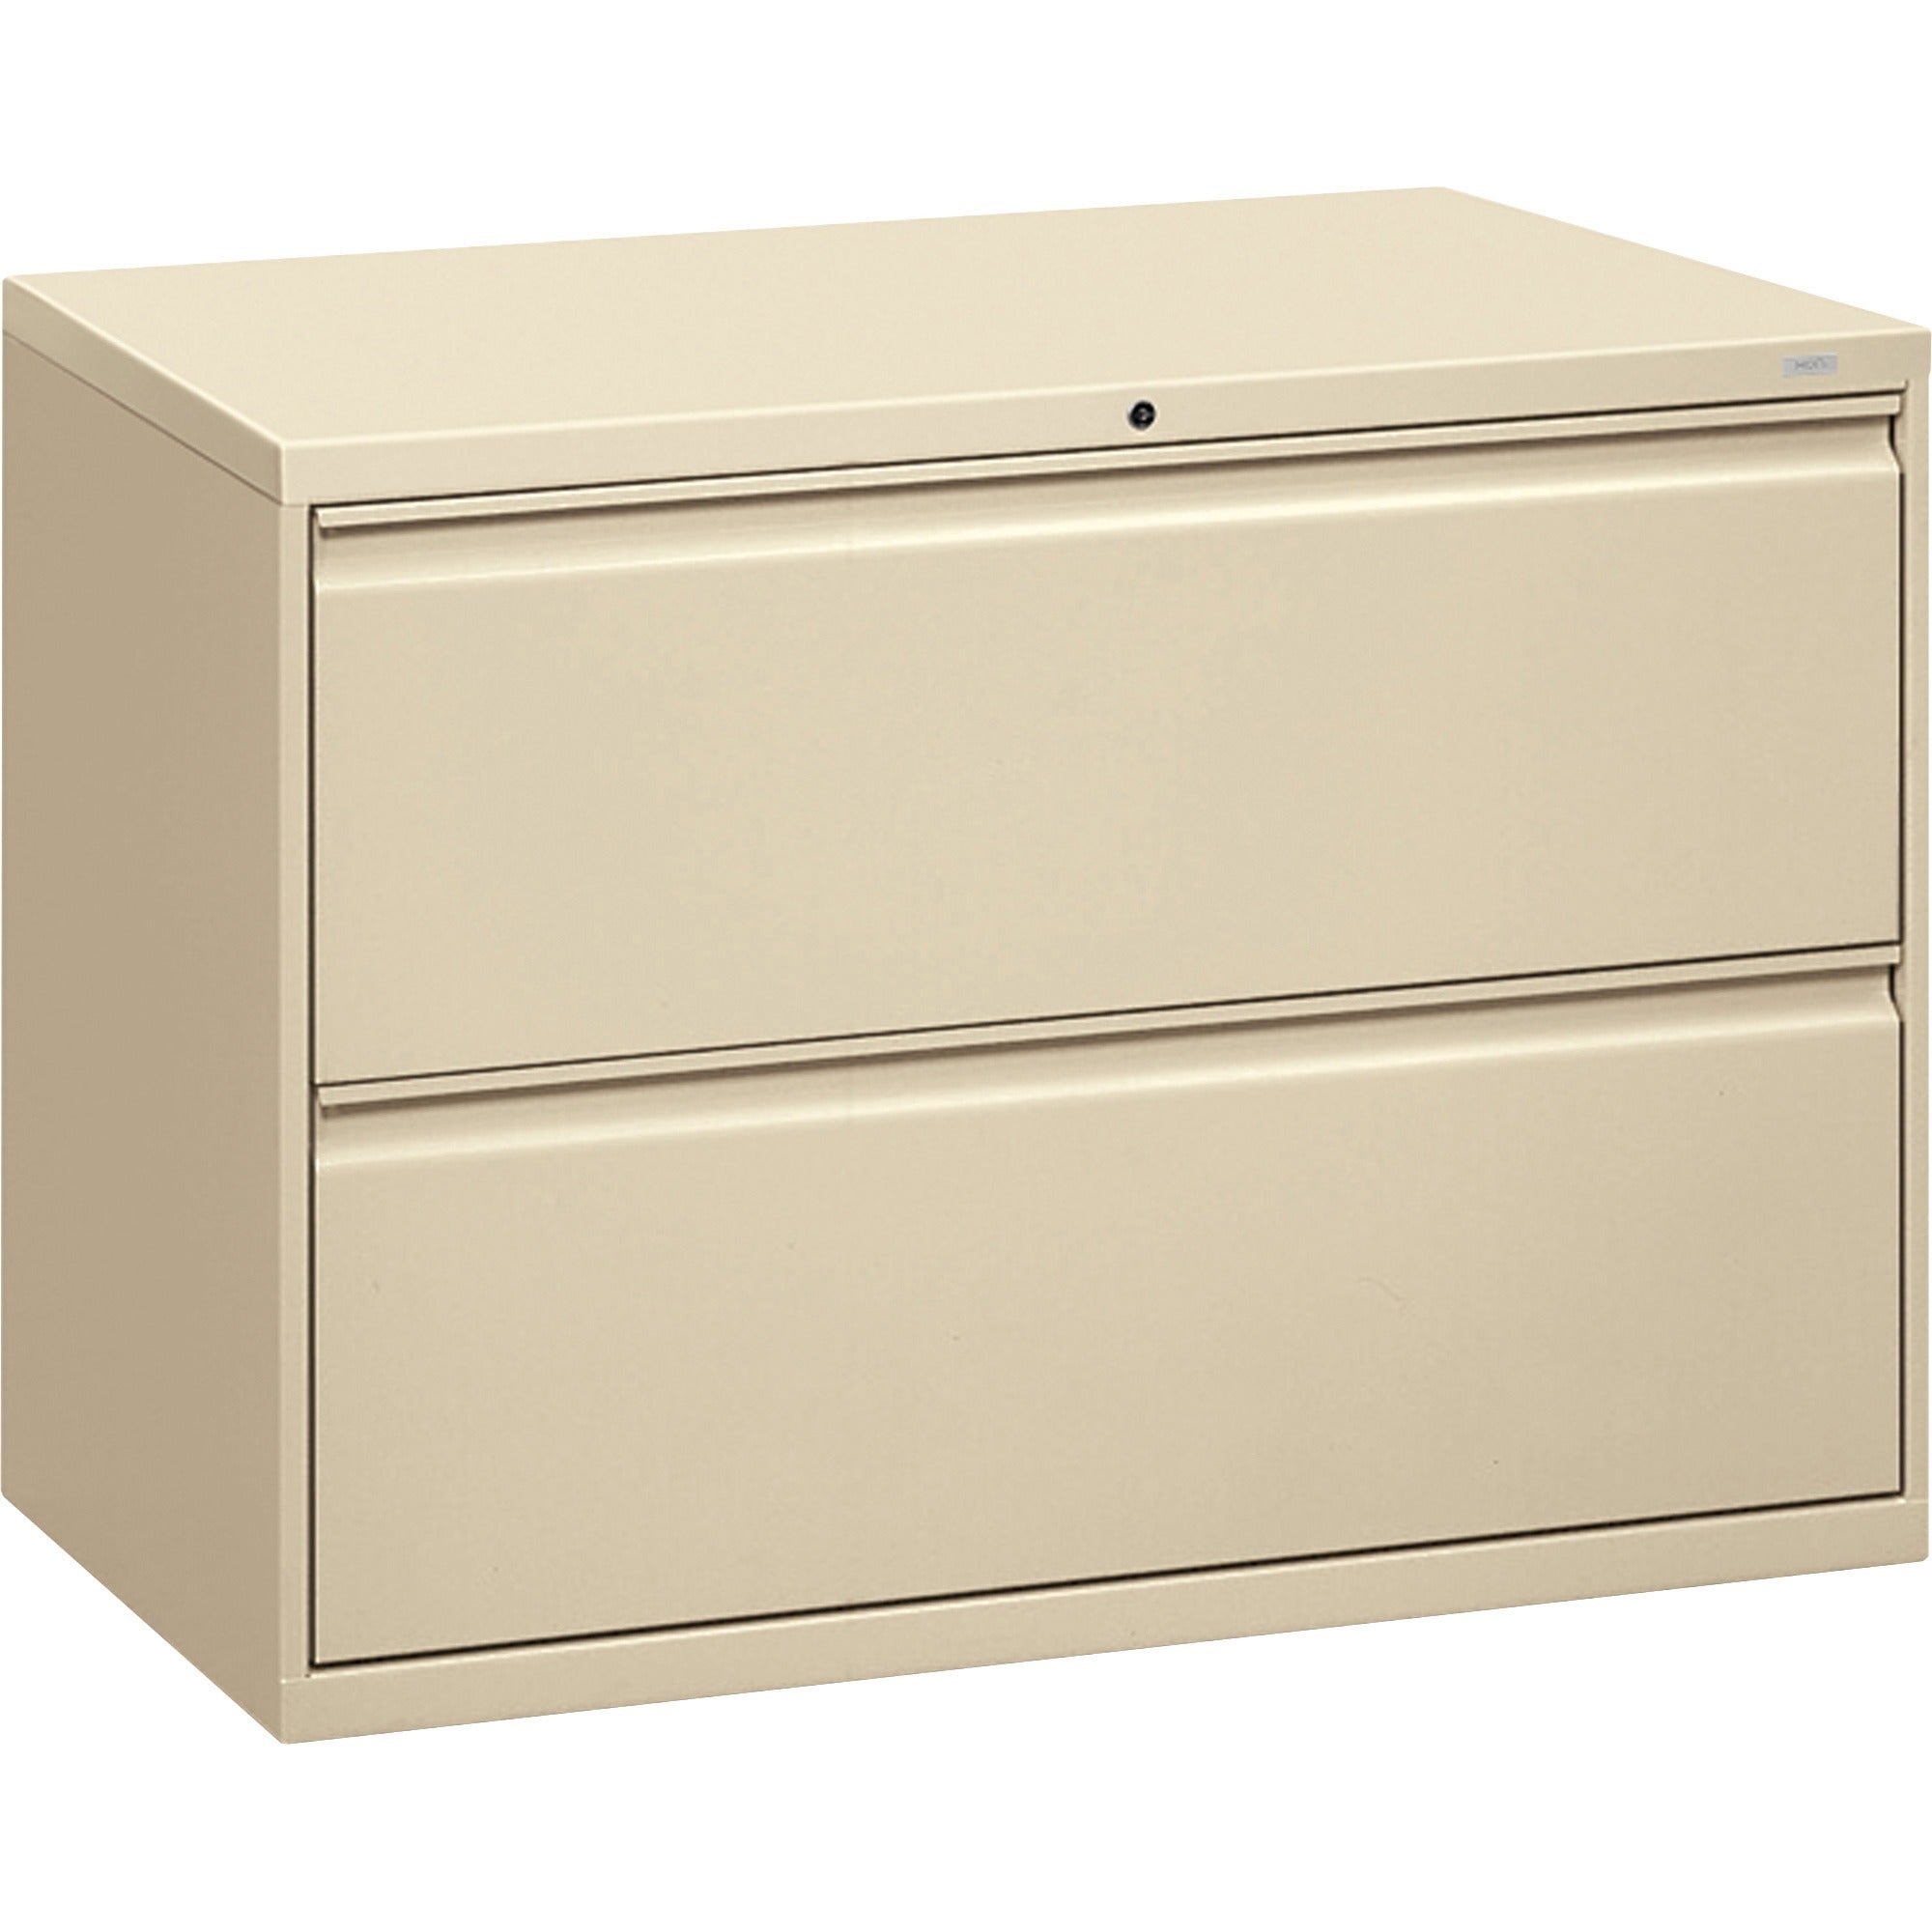 hon-brigade-800-h892-lateral-file-42-x-18284-2-drawers-finish-putty_hon892ll - 1